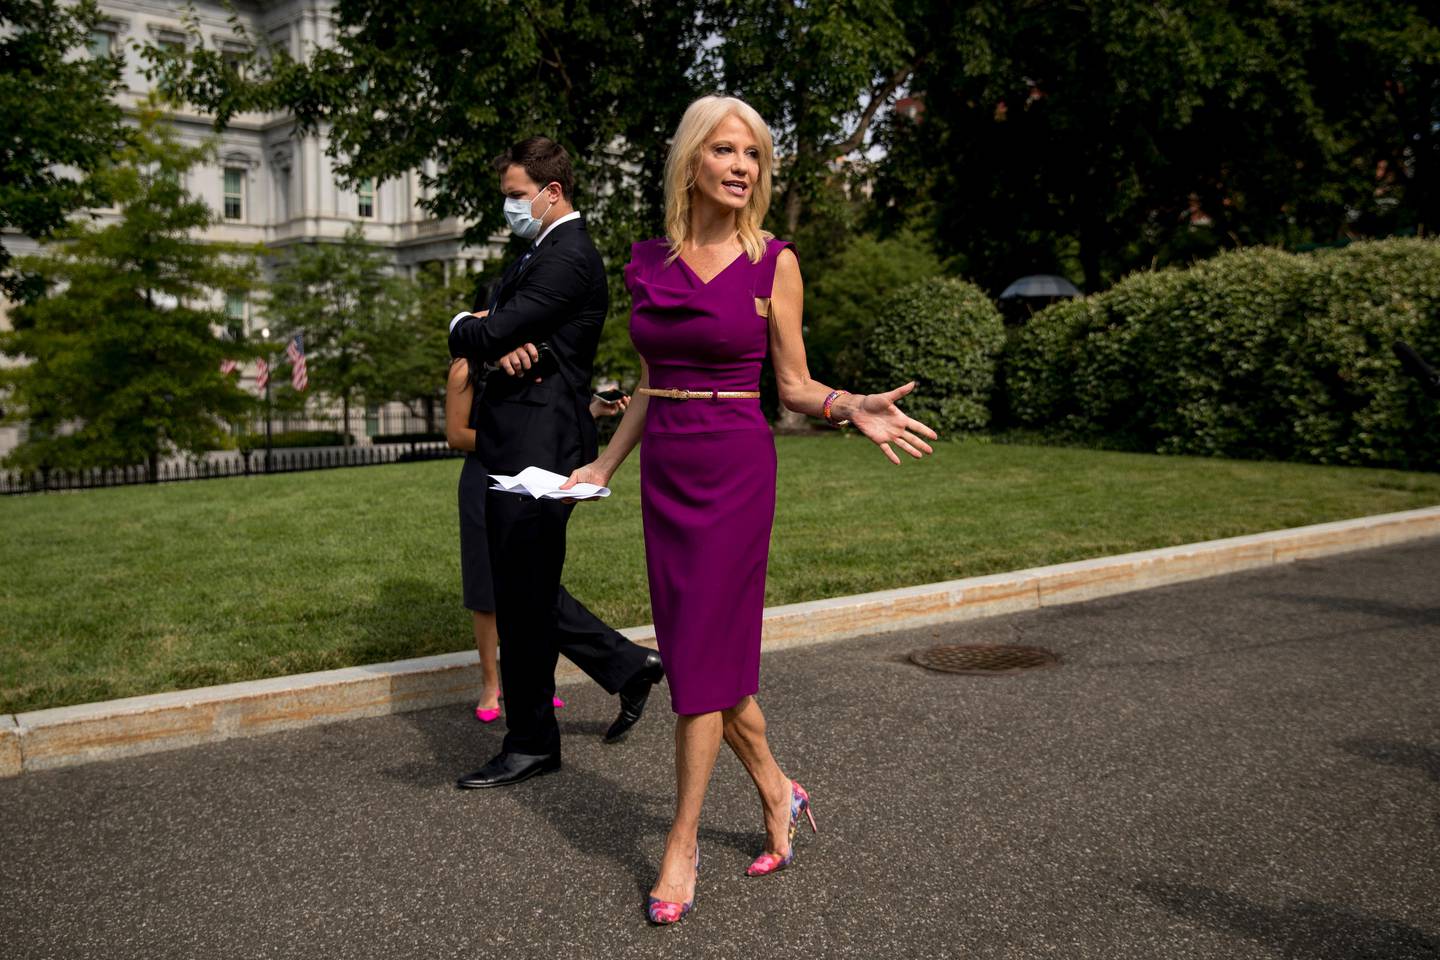 Counselor to the President Kellyanne Conway speaks to reporters outside the West Wing of the White House in Washington, Thursday, Aug. 6, 2020. (AP Photo/Andrew Harnik)